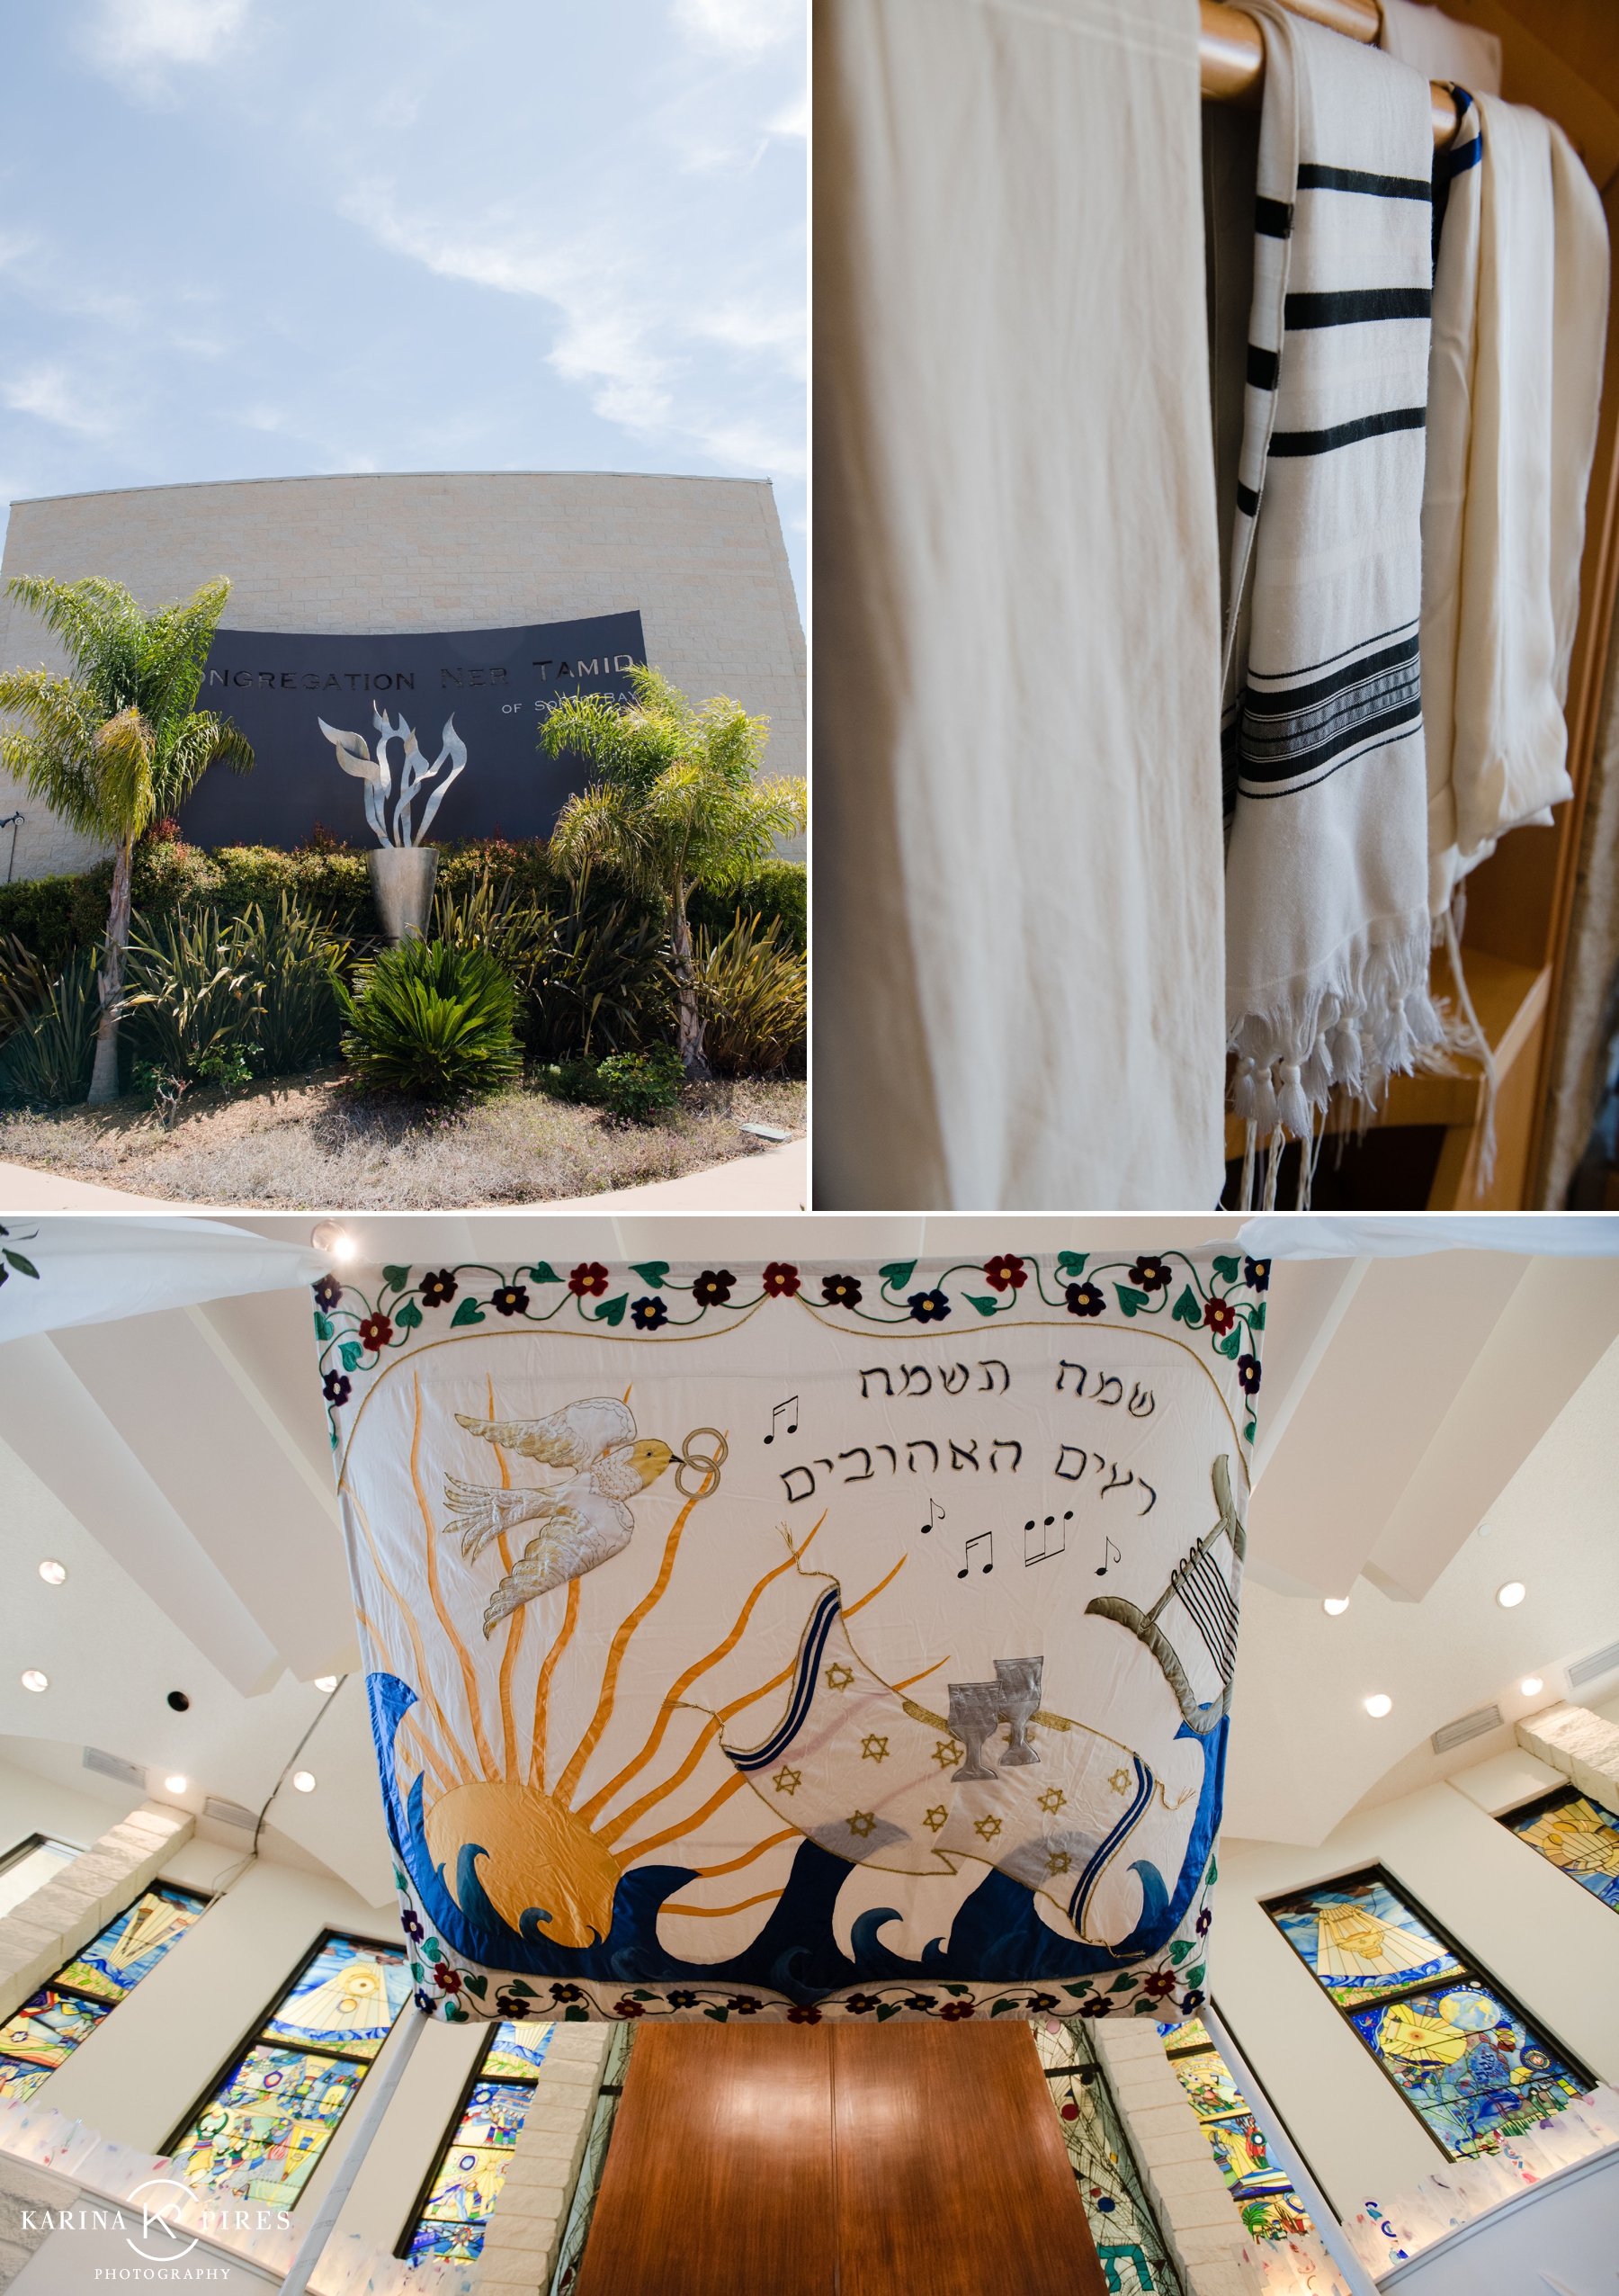  Congregation Ner Tamid Wedding by Karina Pires Photography